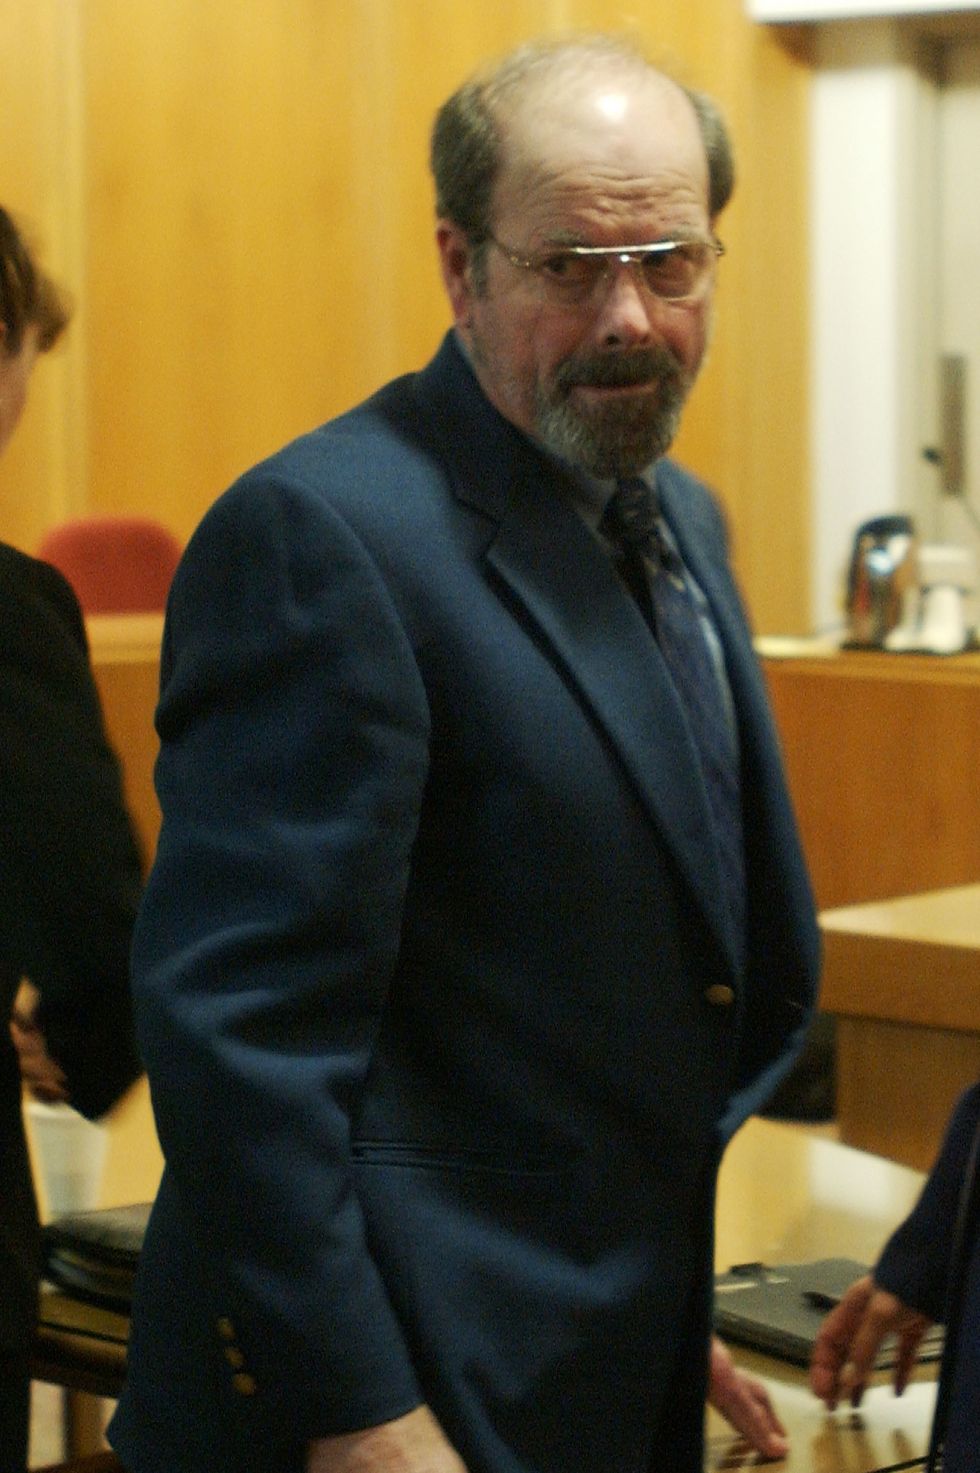 btk killer dennis rader turning back and looking to his right as he leaves a courtroom